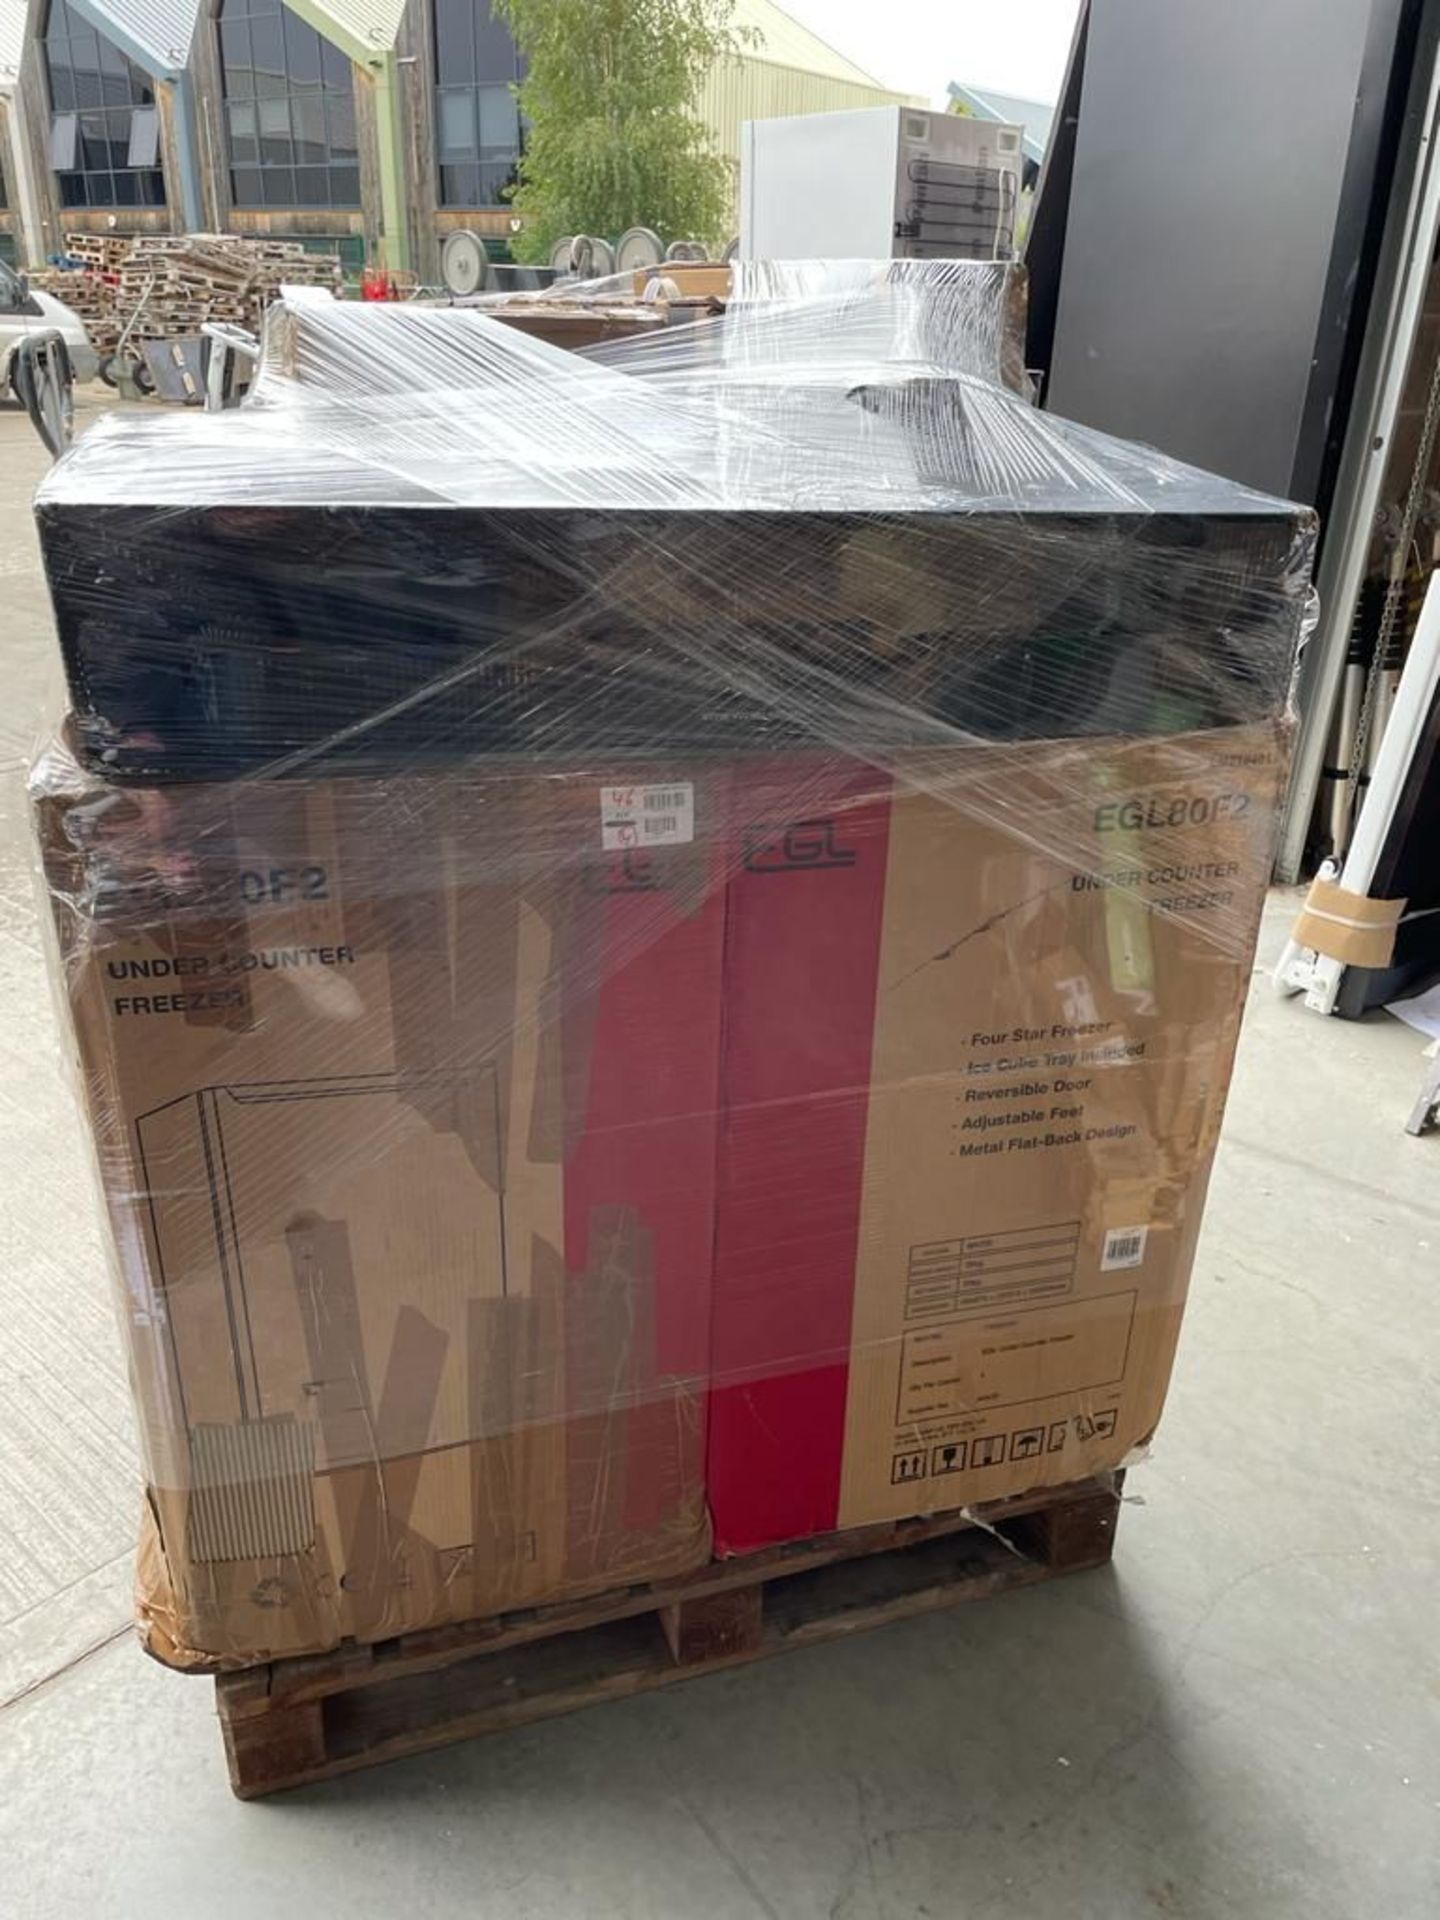 Mixed Retail Returns Pallet RRP - £3513 - Image 2 of 5